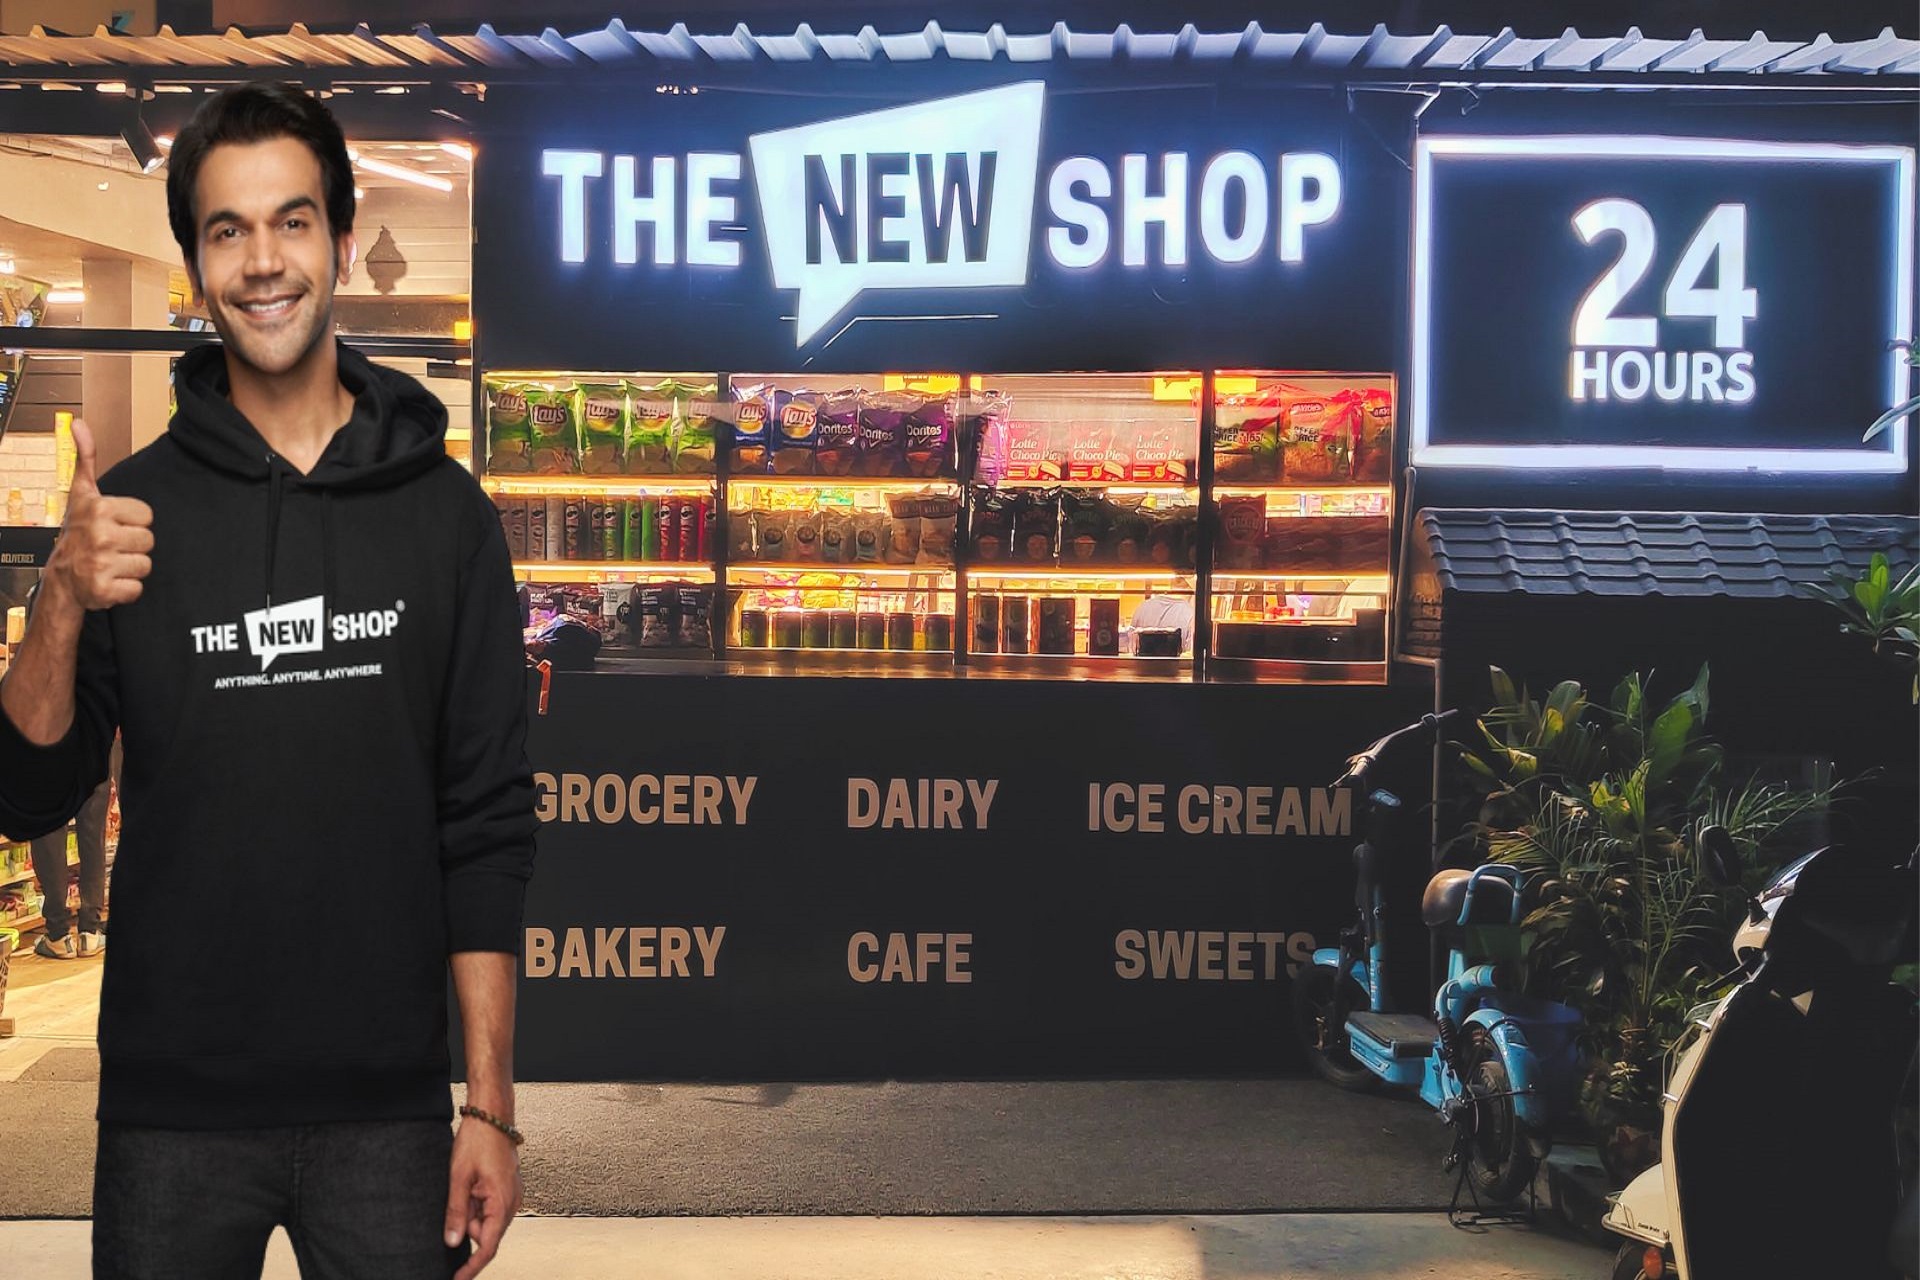 The New Shop makes a bold bet on its Franchise Model